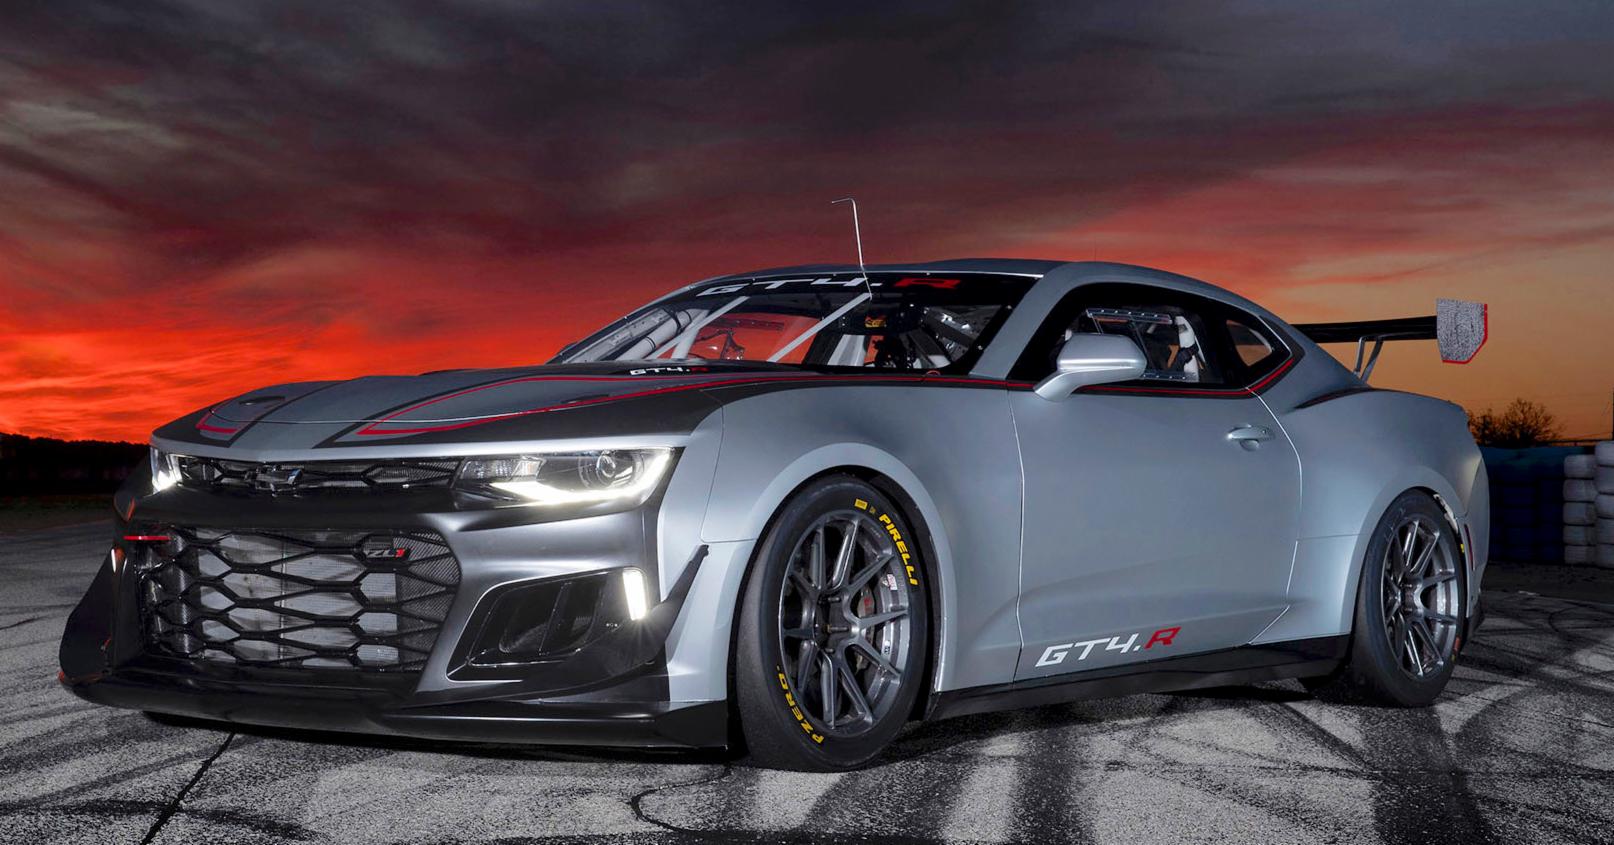 We Need This Road Devouring Camaro Gt4r Race Car Thats Now For Sale